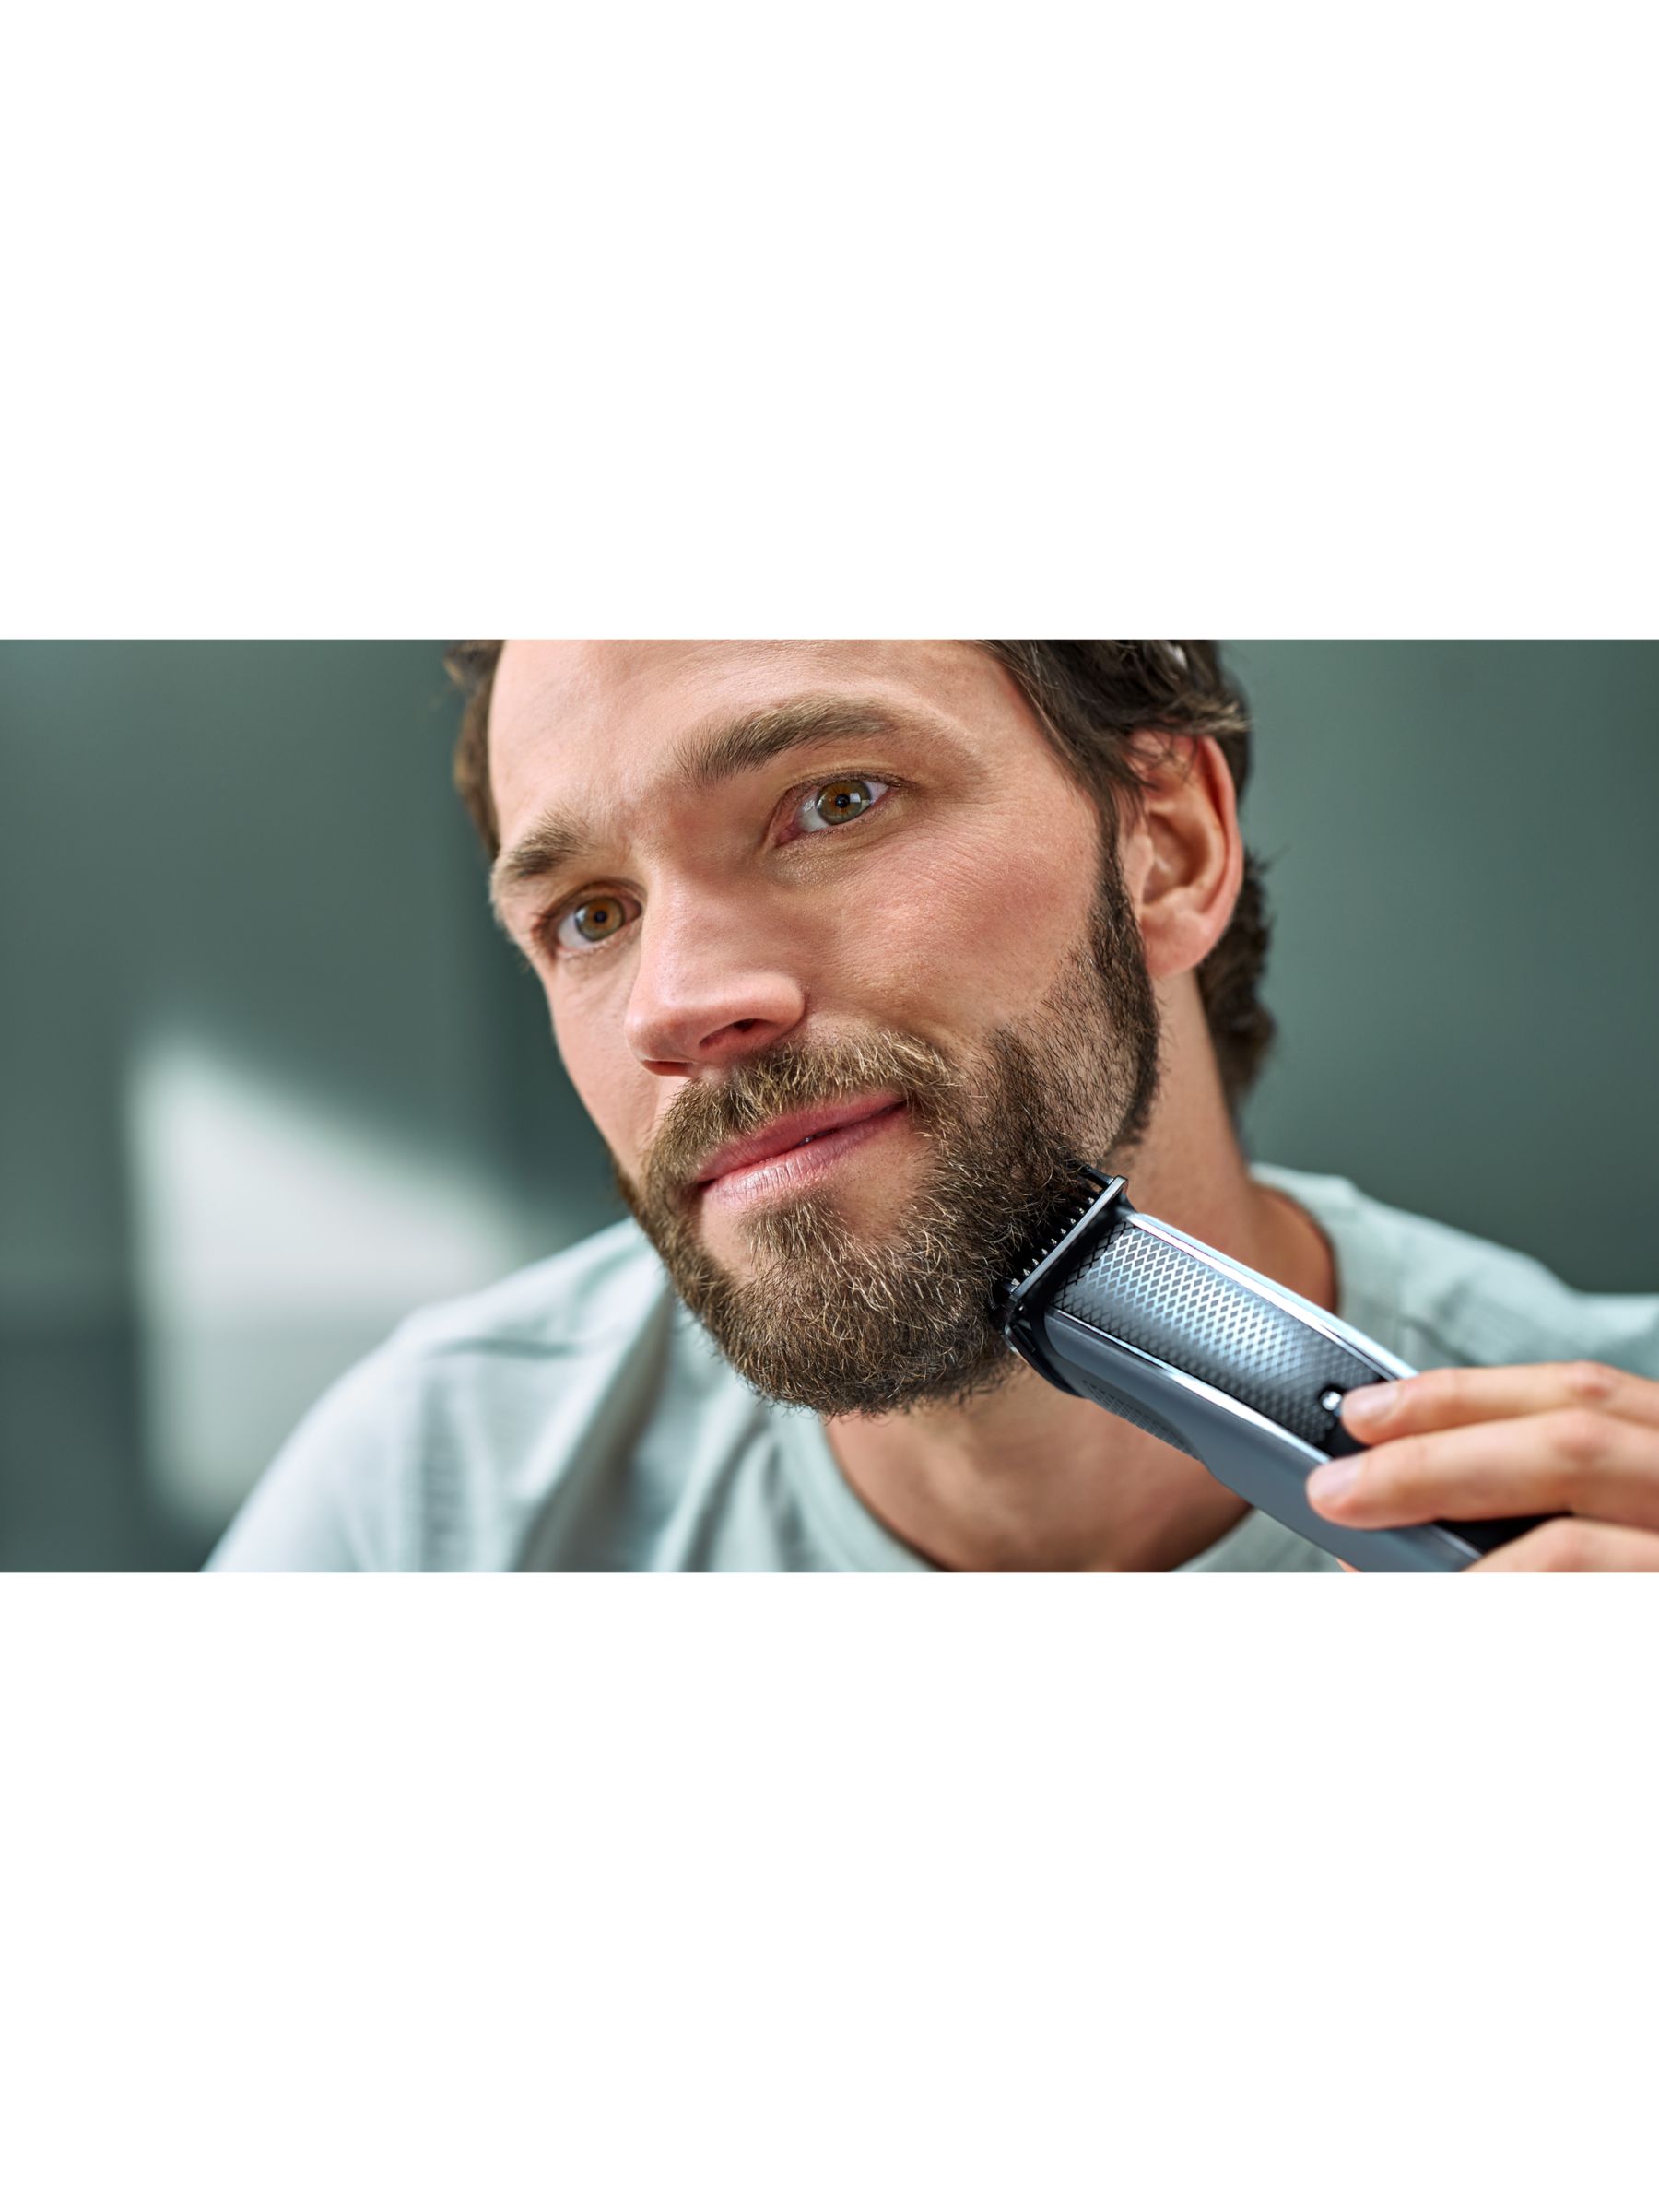 philips trimmer 0.2 mm